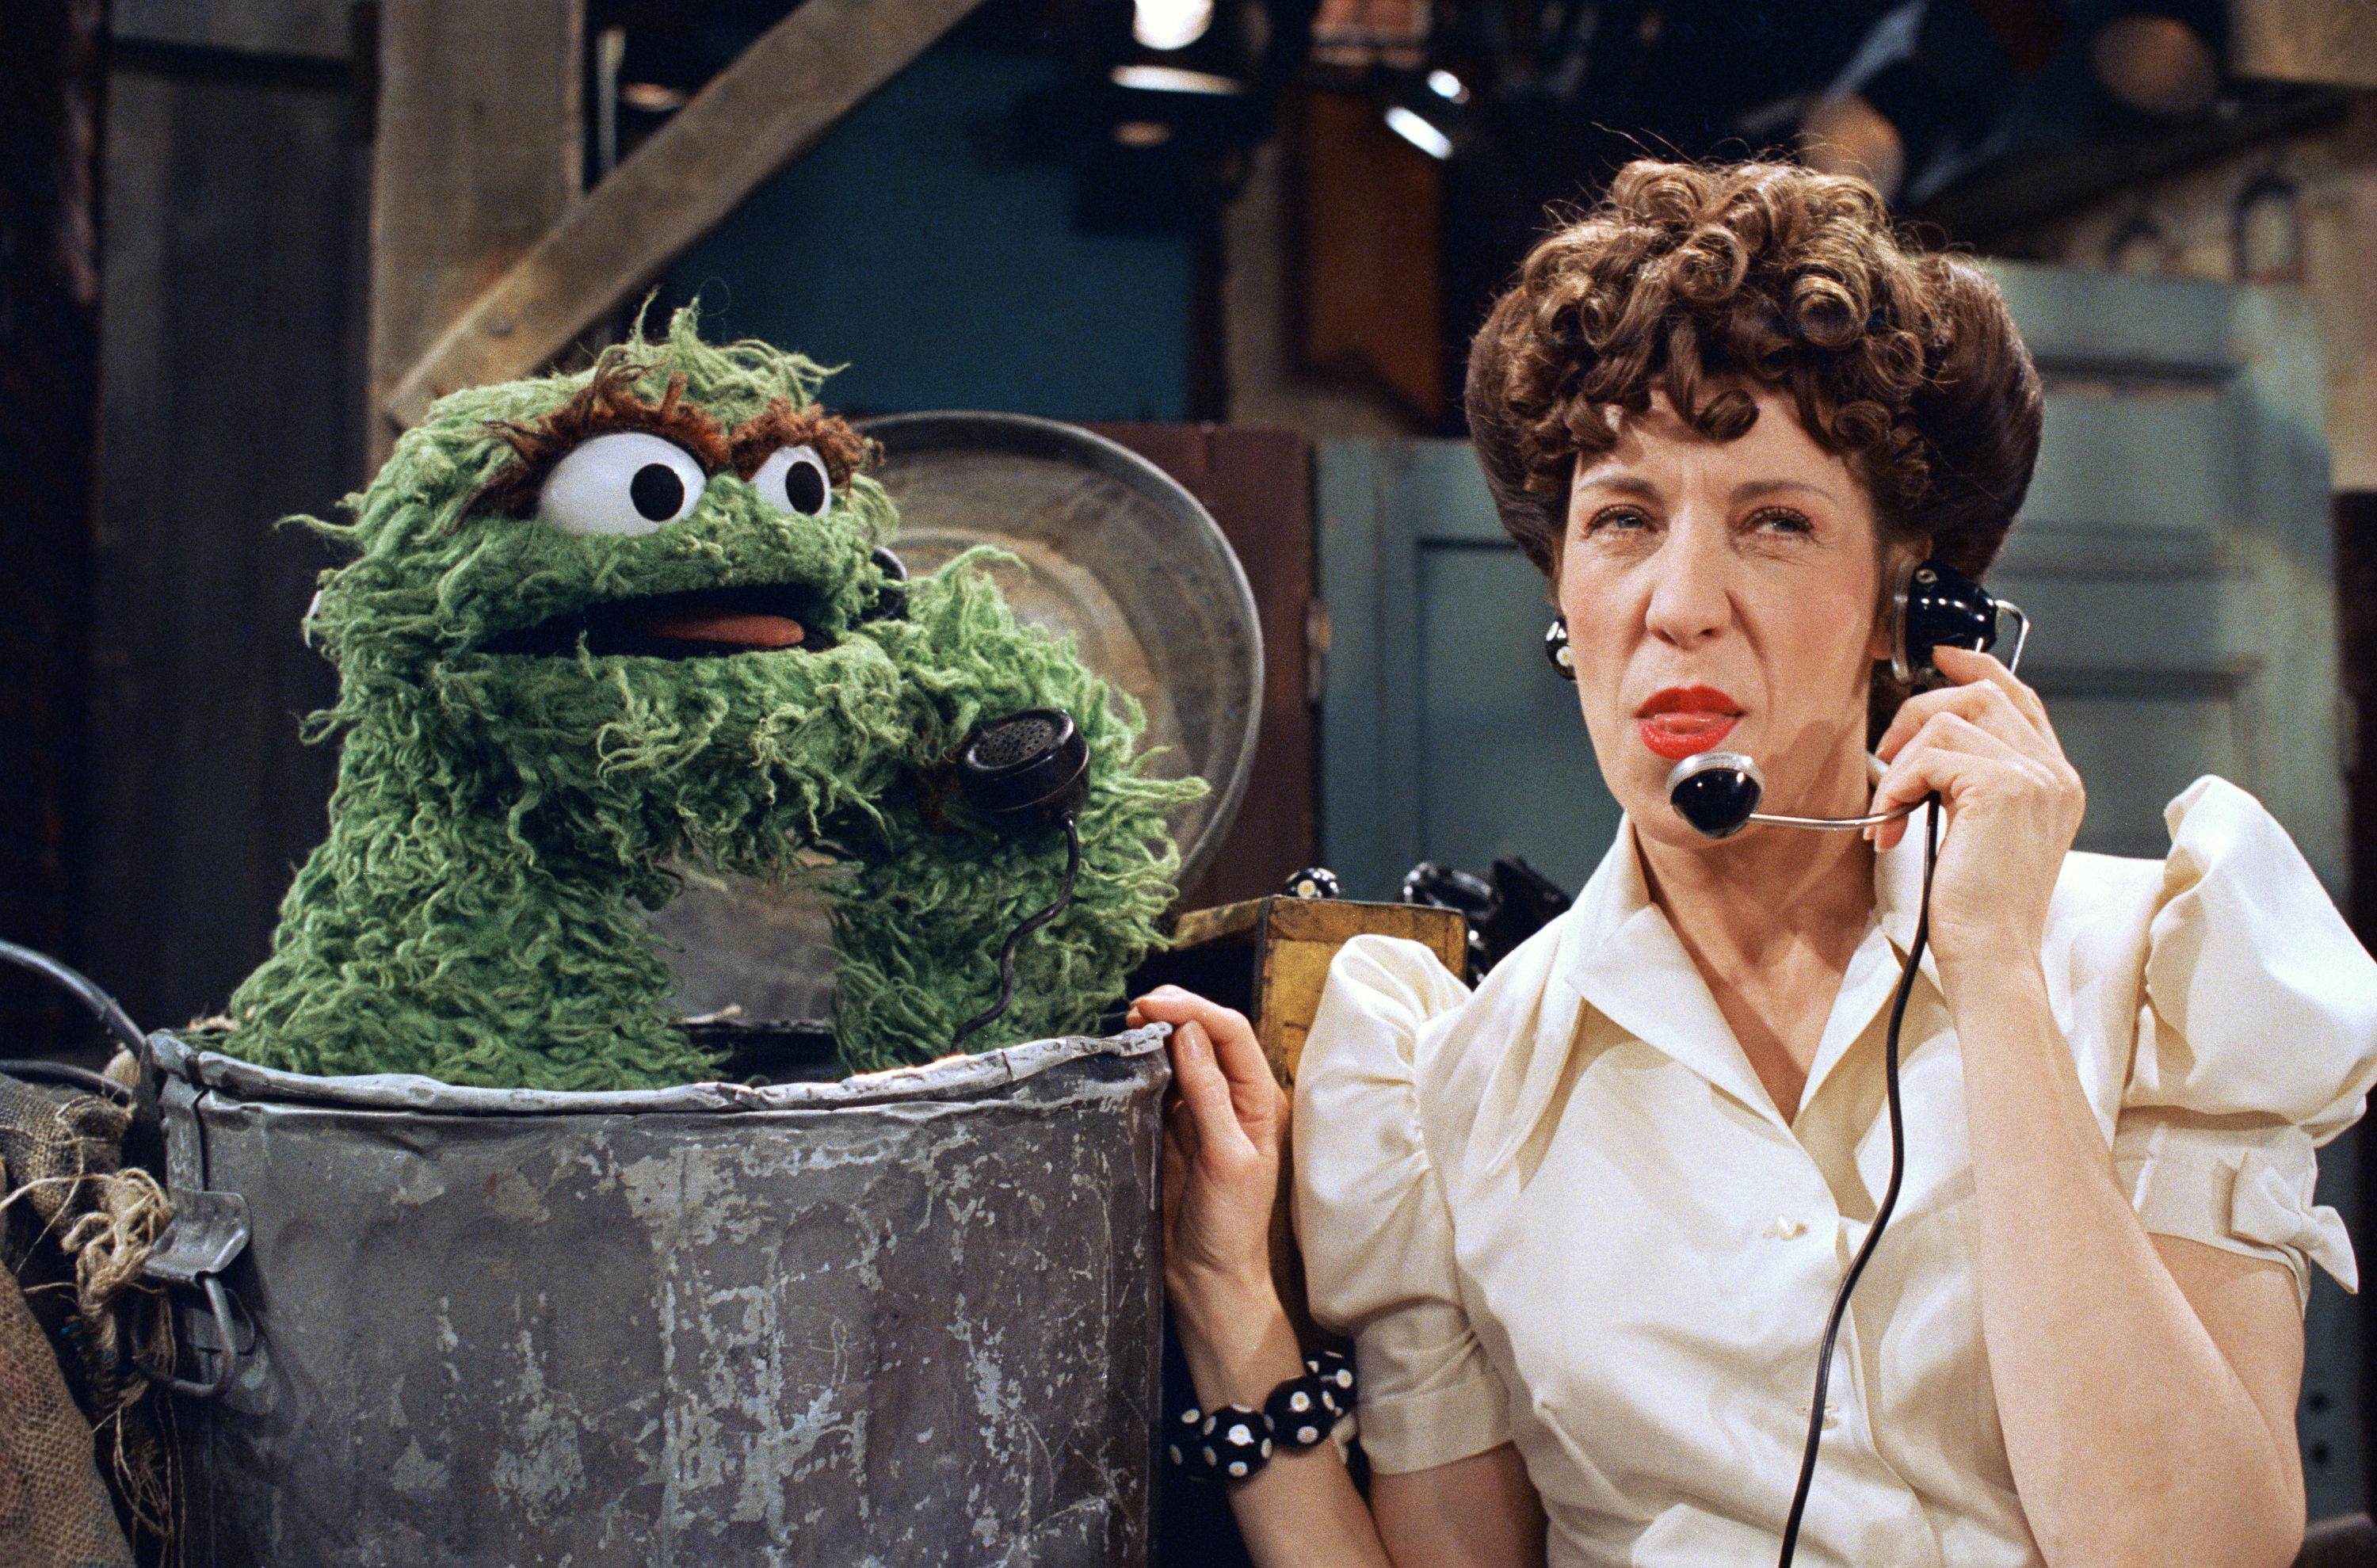 Lily Tomlin plays “Ernestine” the telephone operator in a skit with Oscar the grouch when she appeared on the TV Show “Sesame Street” in New York on Sept. 19, 1988. (AP Photo/Marty Lederhandler)